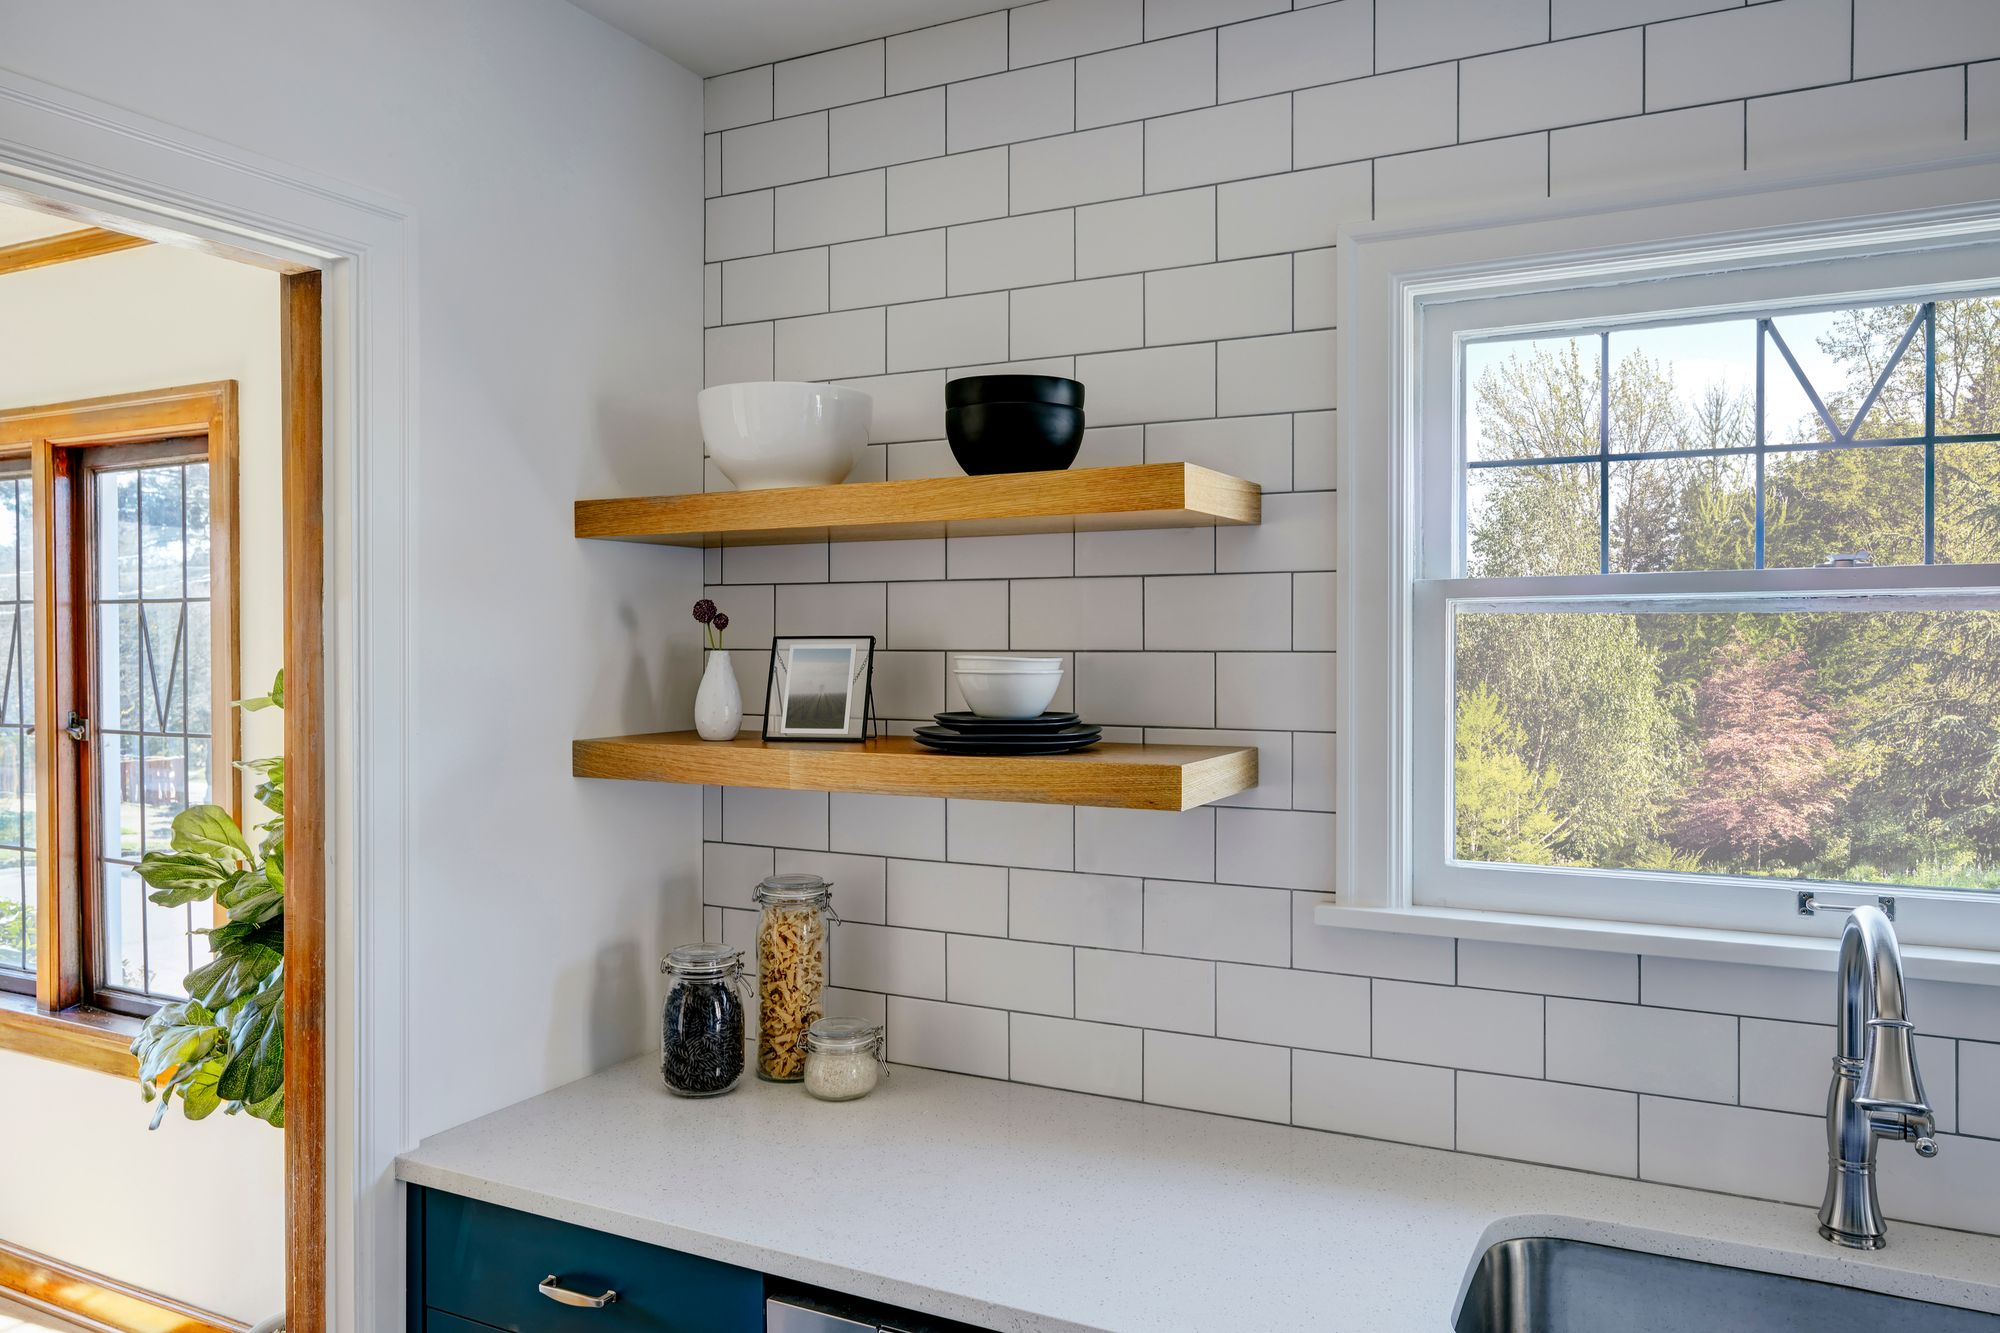 A kitchen with floating shelves.